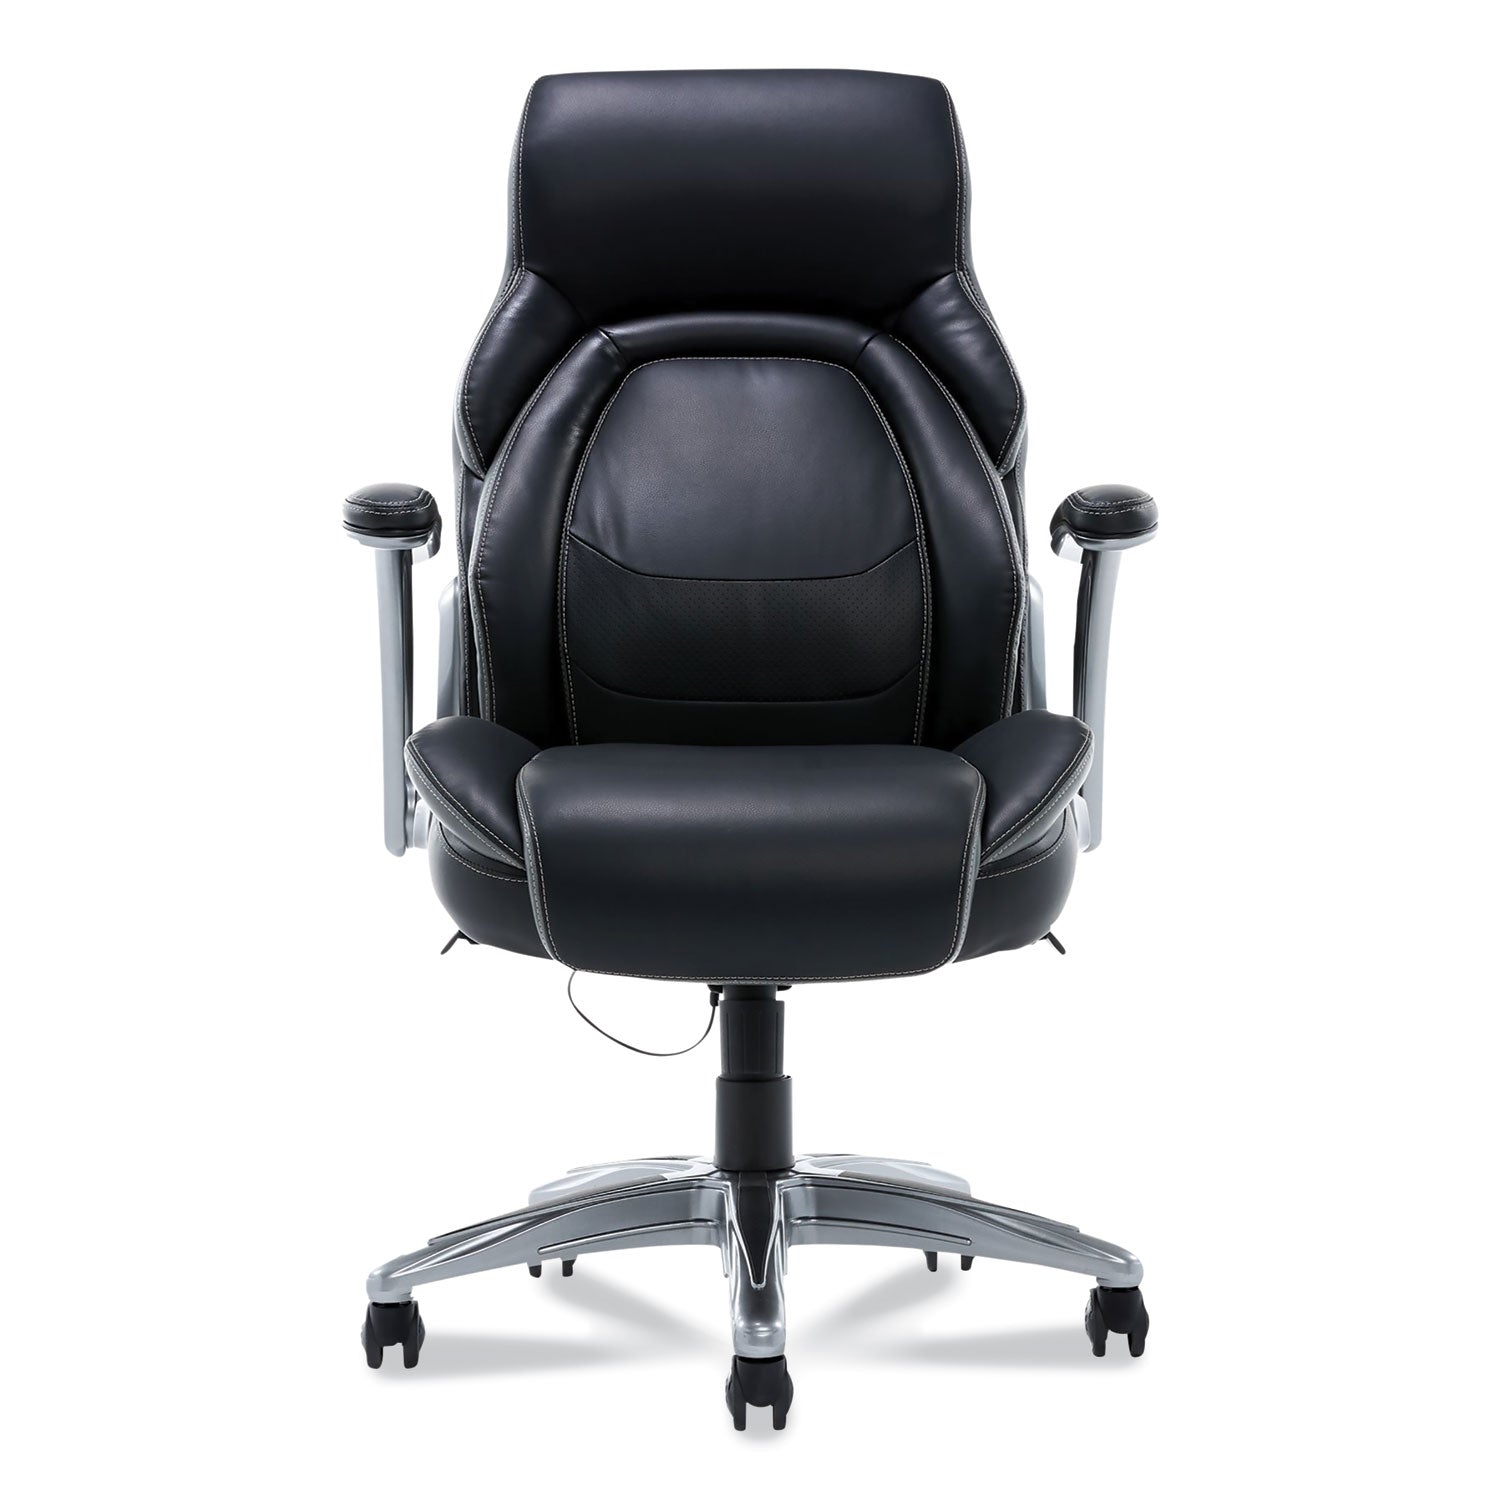 manager-chair-supports-up-to-2756-lb-black-seat-back-silver-base_dox60030 - 1